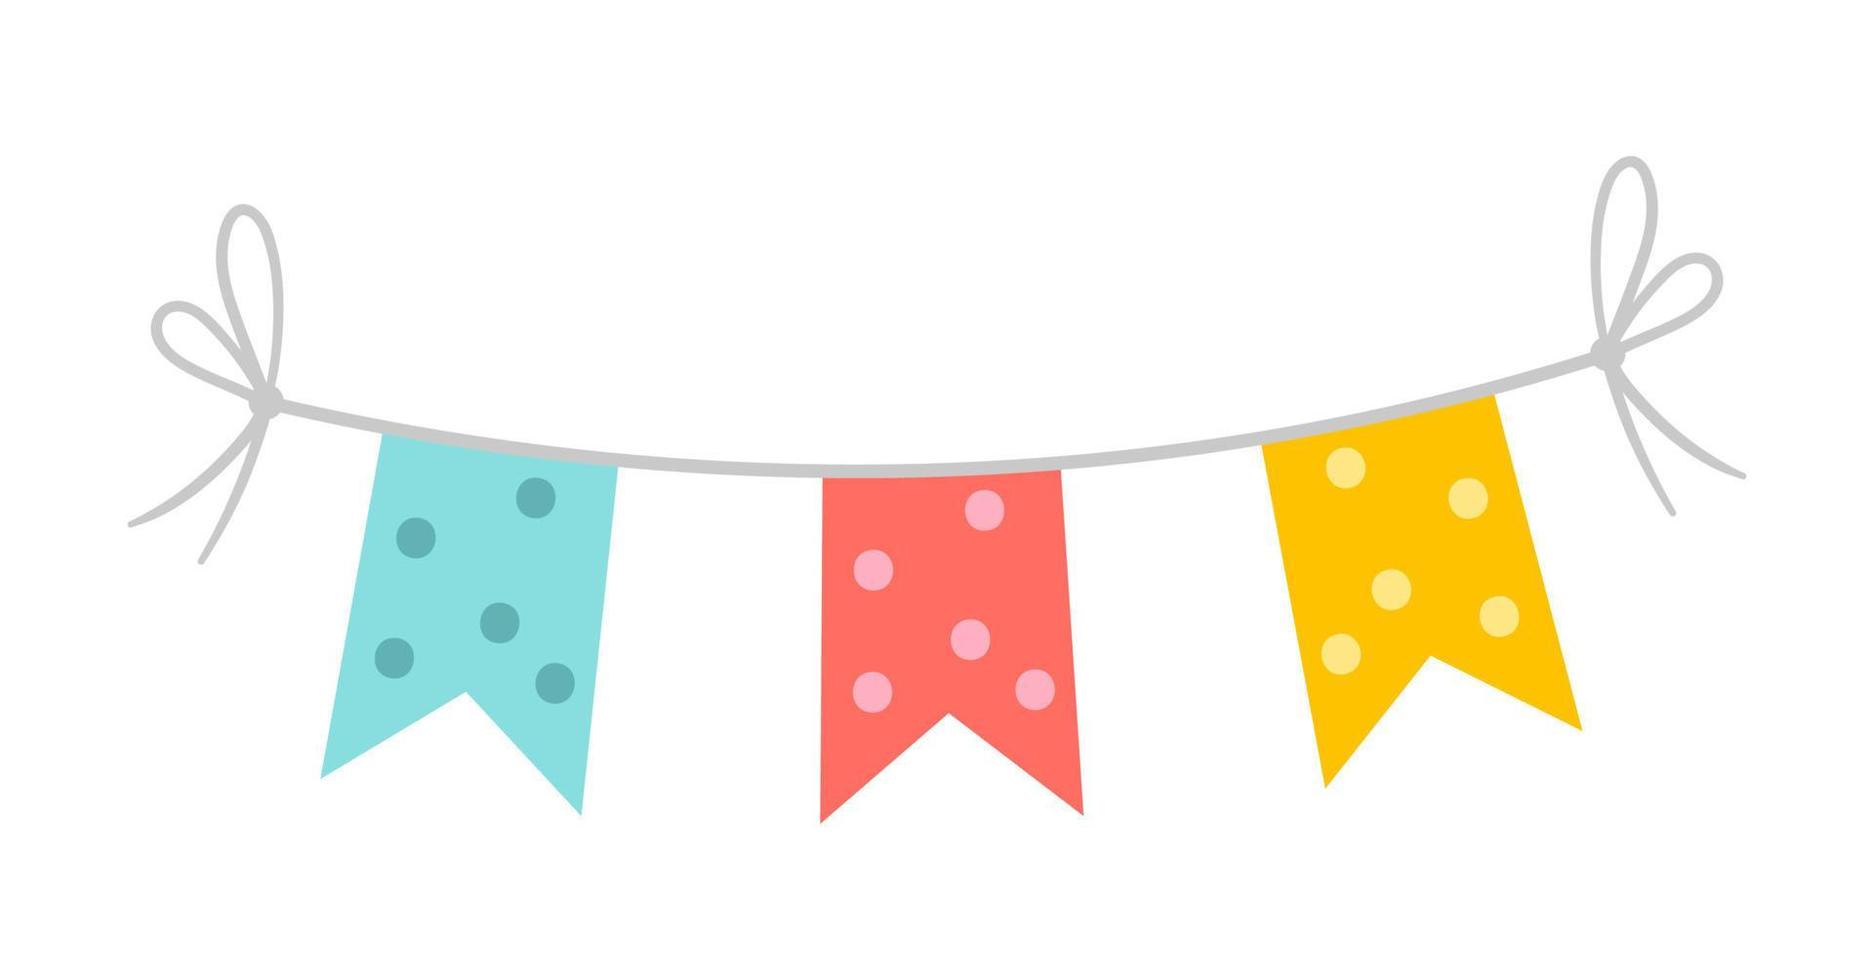 Vector rectangle flags for holidays decoration. Cute funny hanging carnival pennants illustration for card, invitation, banner design. Bright festival or fair garland isolated on white background.